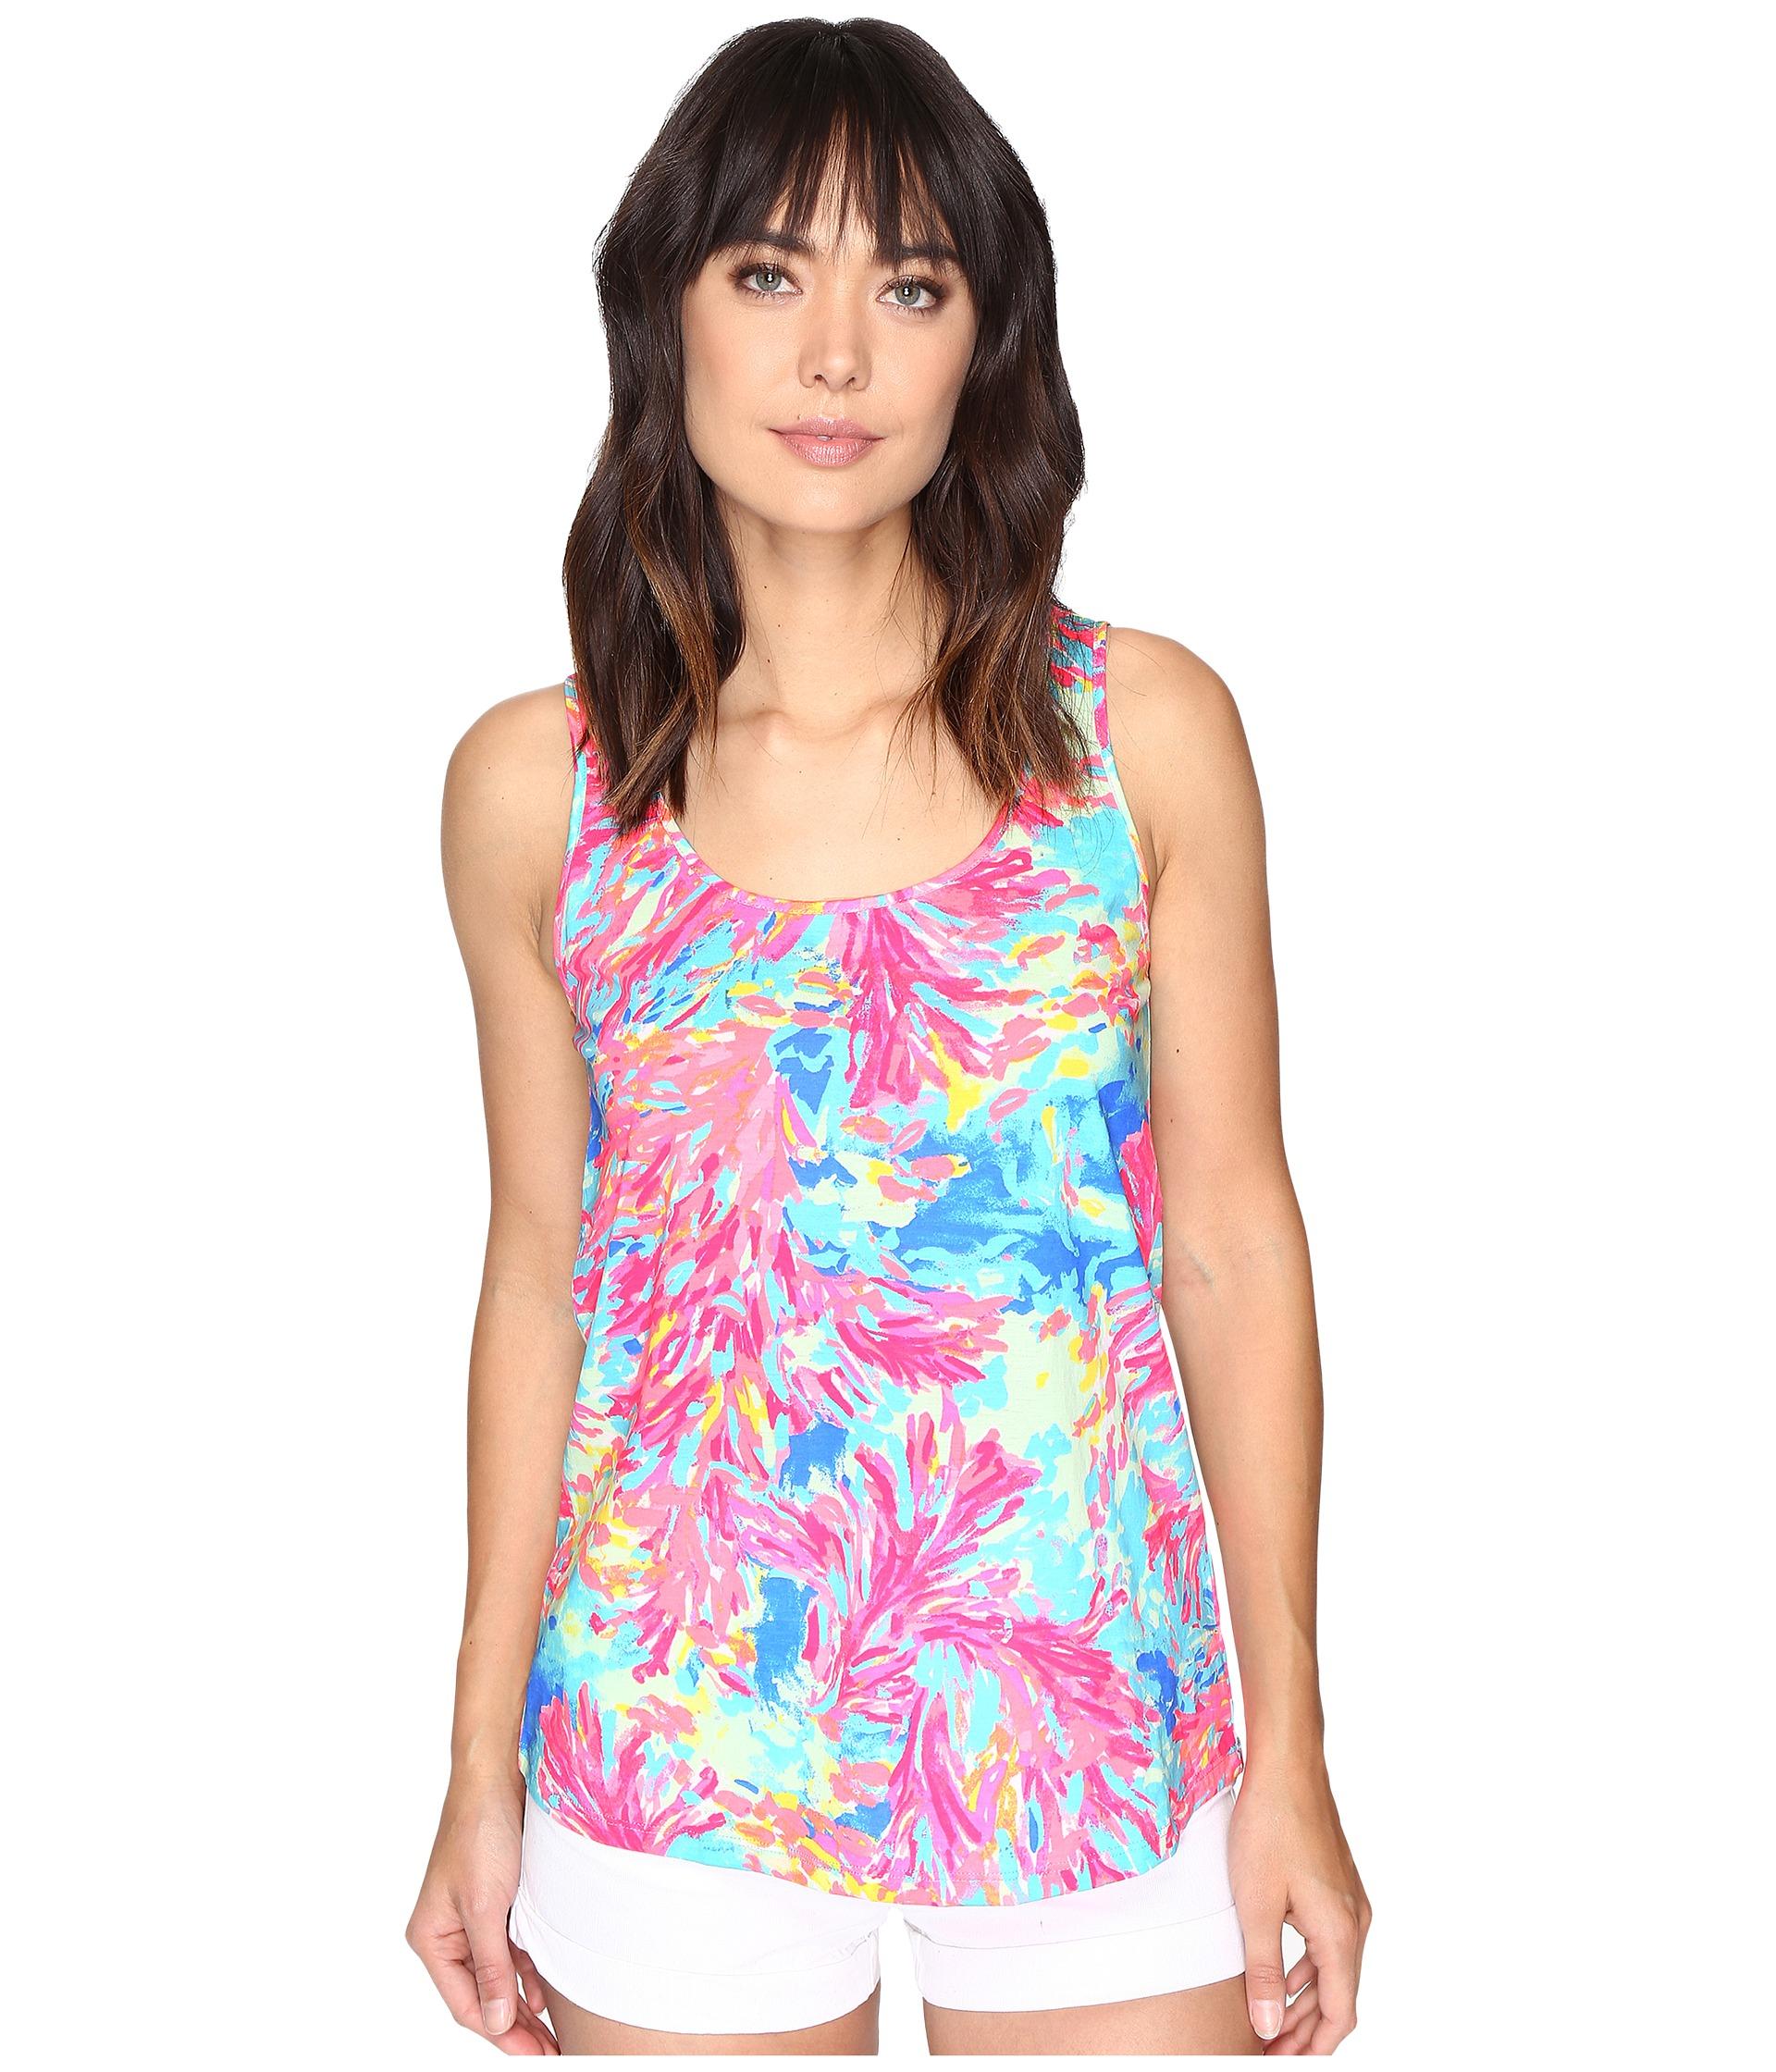 Lyst - Lilly Pulitzer Kinsey Tank Top